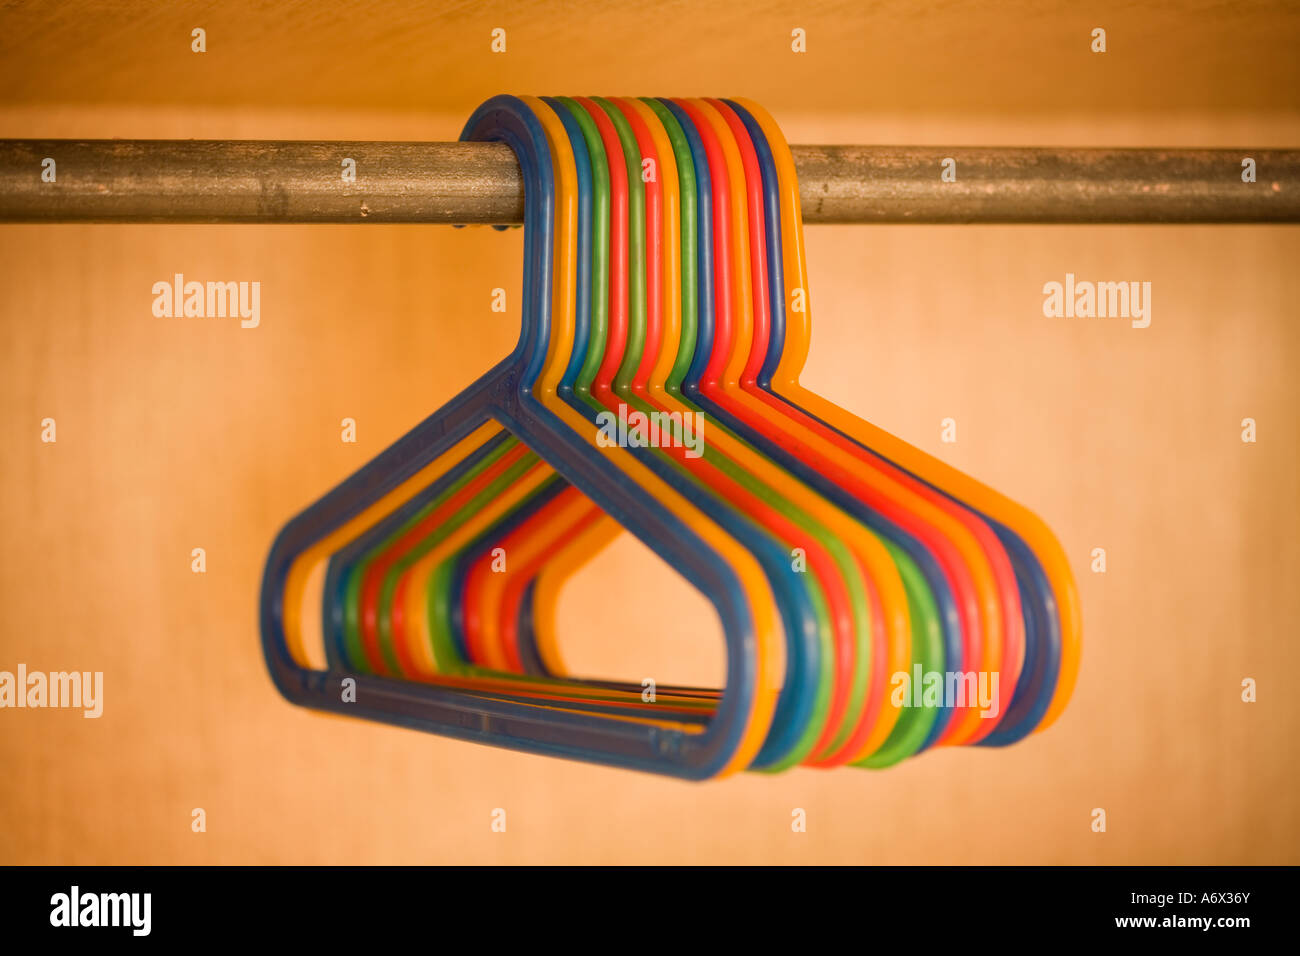 Multi colored plastic clothes hangers in closet, hanging from horizontal bar. Hangers are all very close to one another. Stock Photo